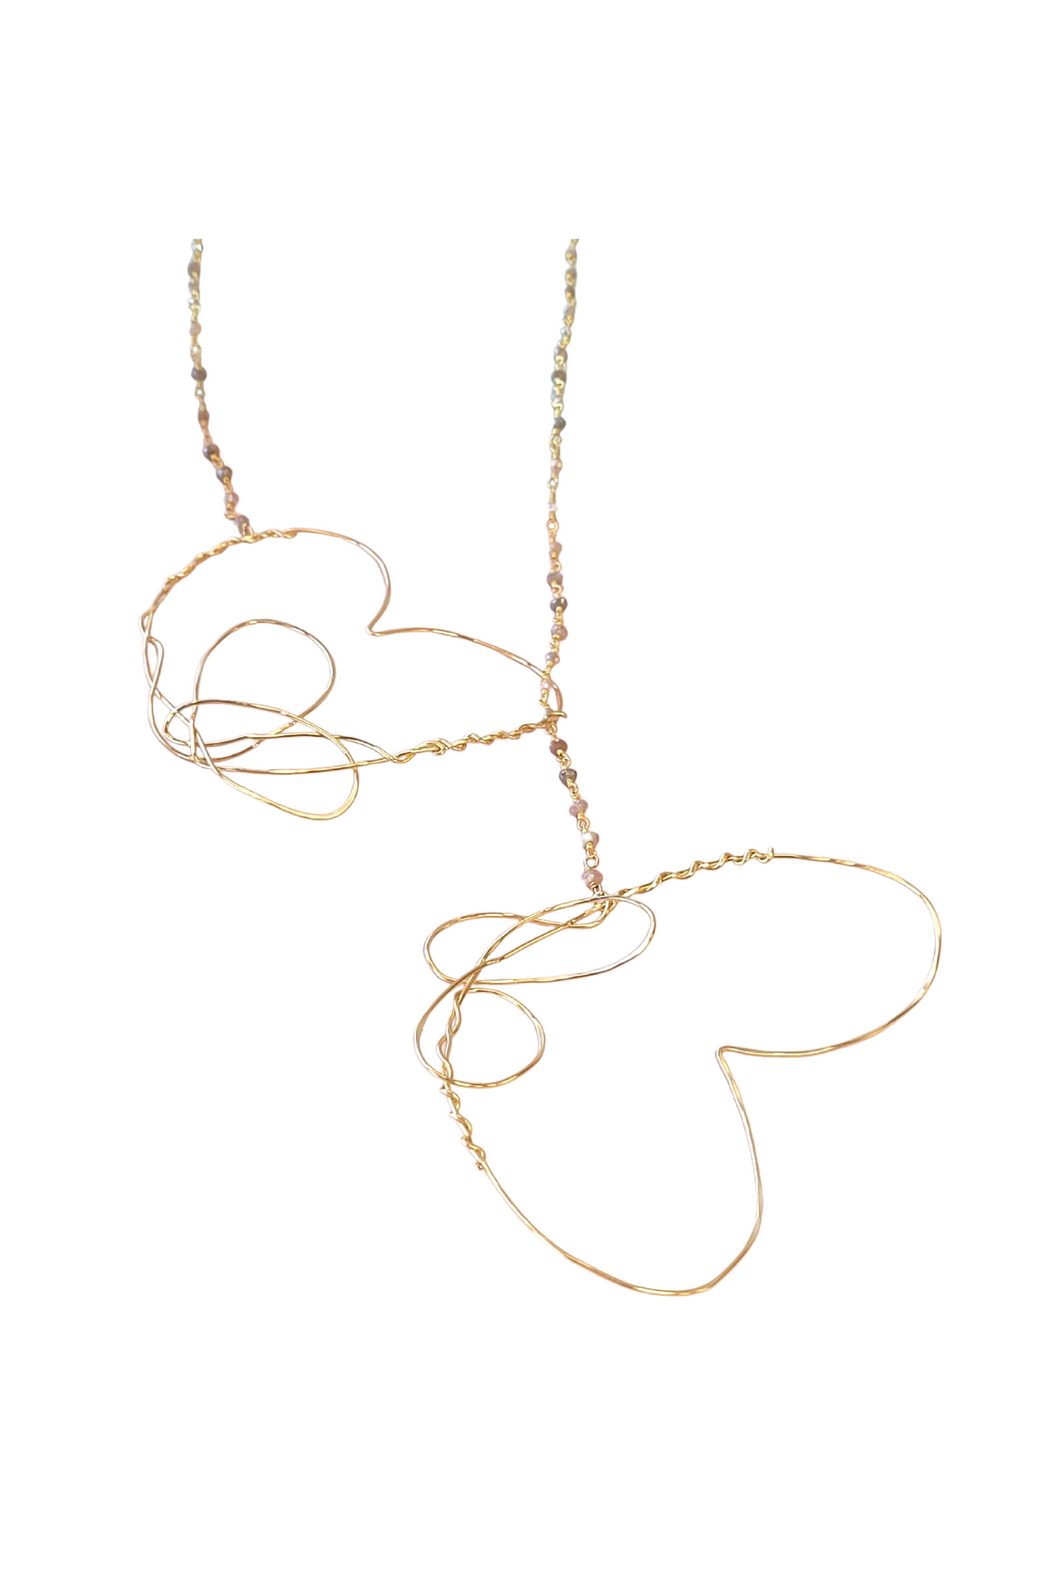 Lariat Necklace in Peach Moonstone with Gold Hearts